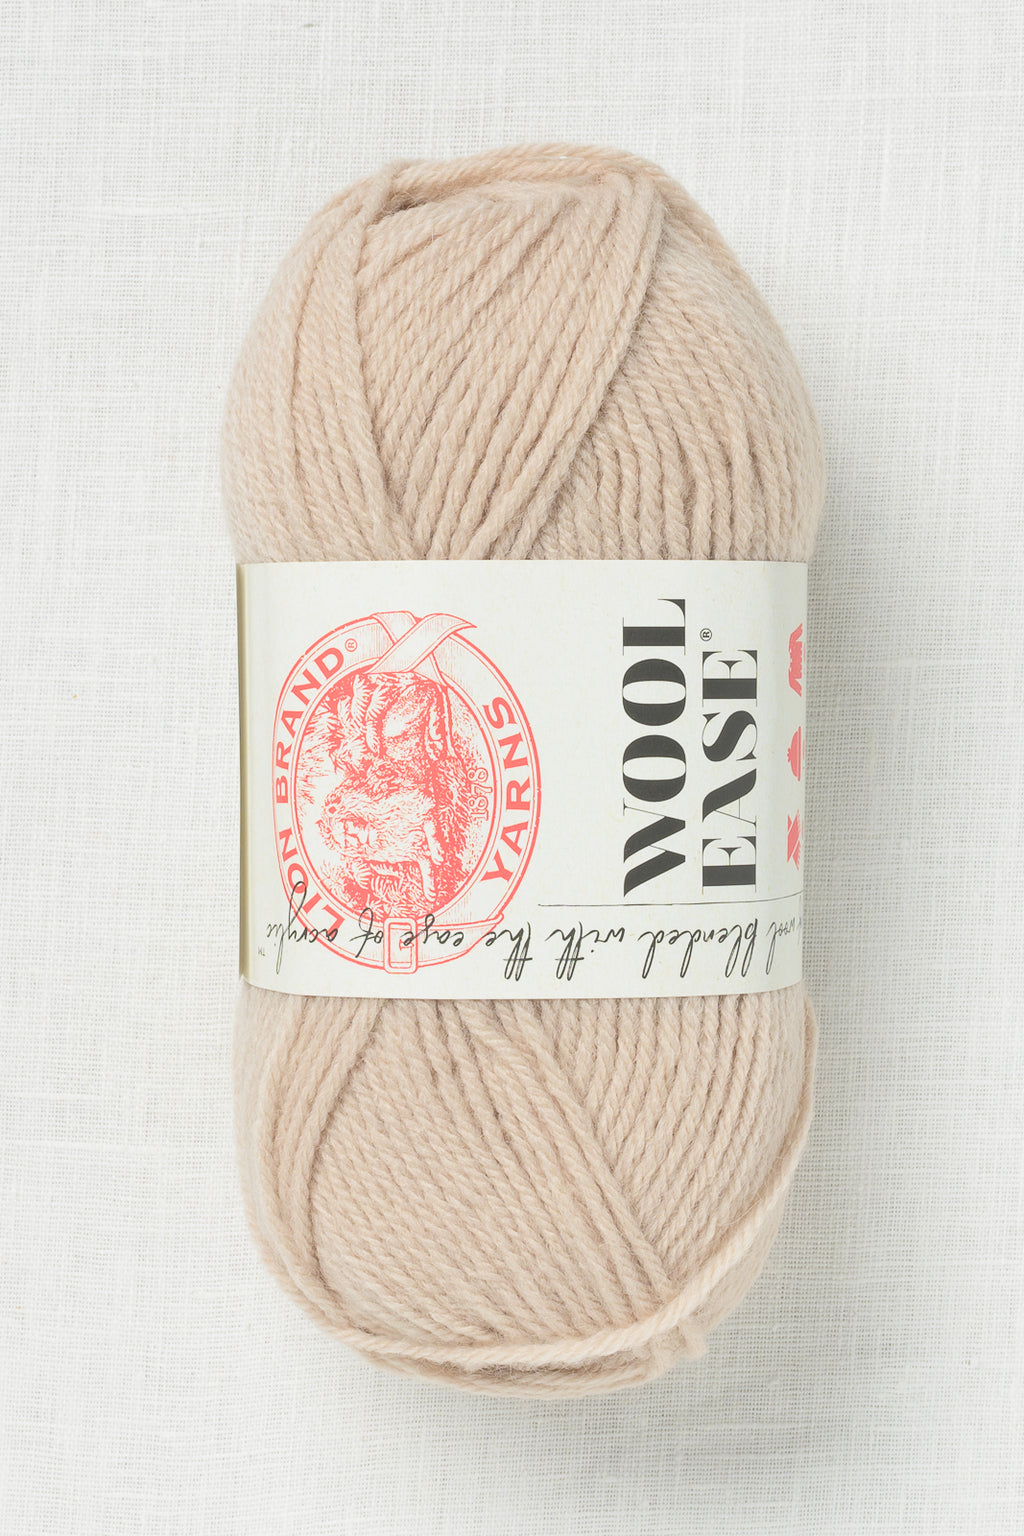 Lion Brand Wool Ease 021A Antler